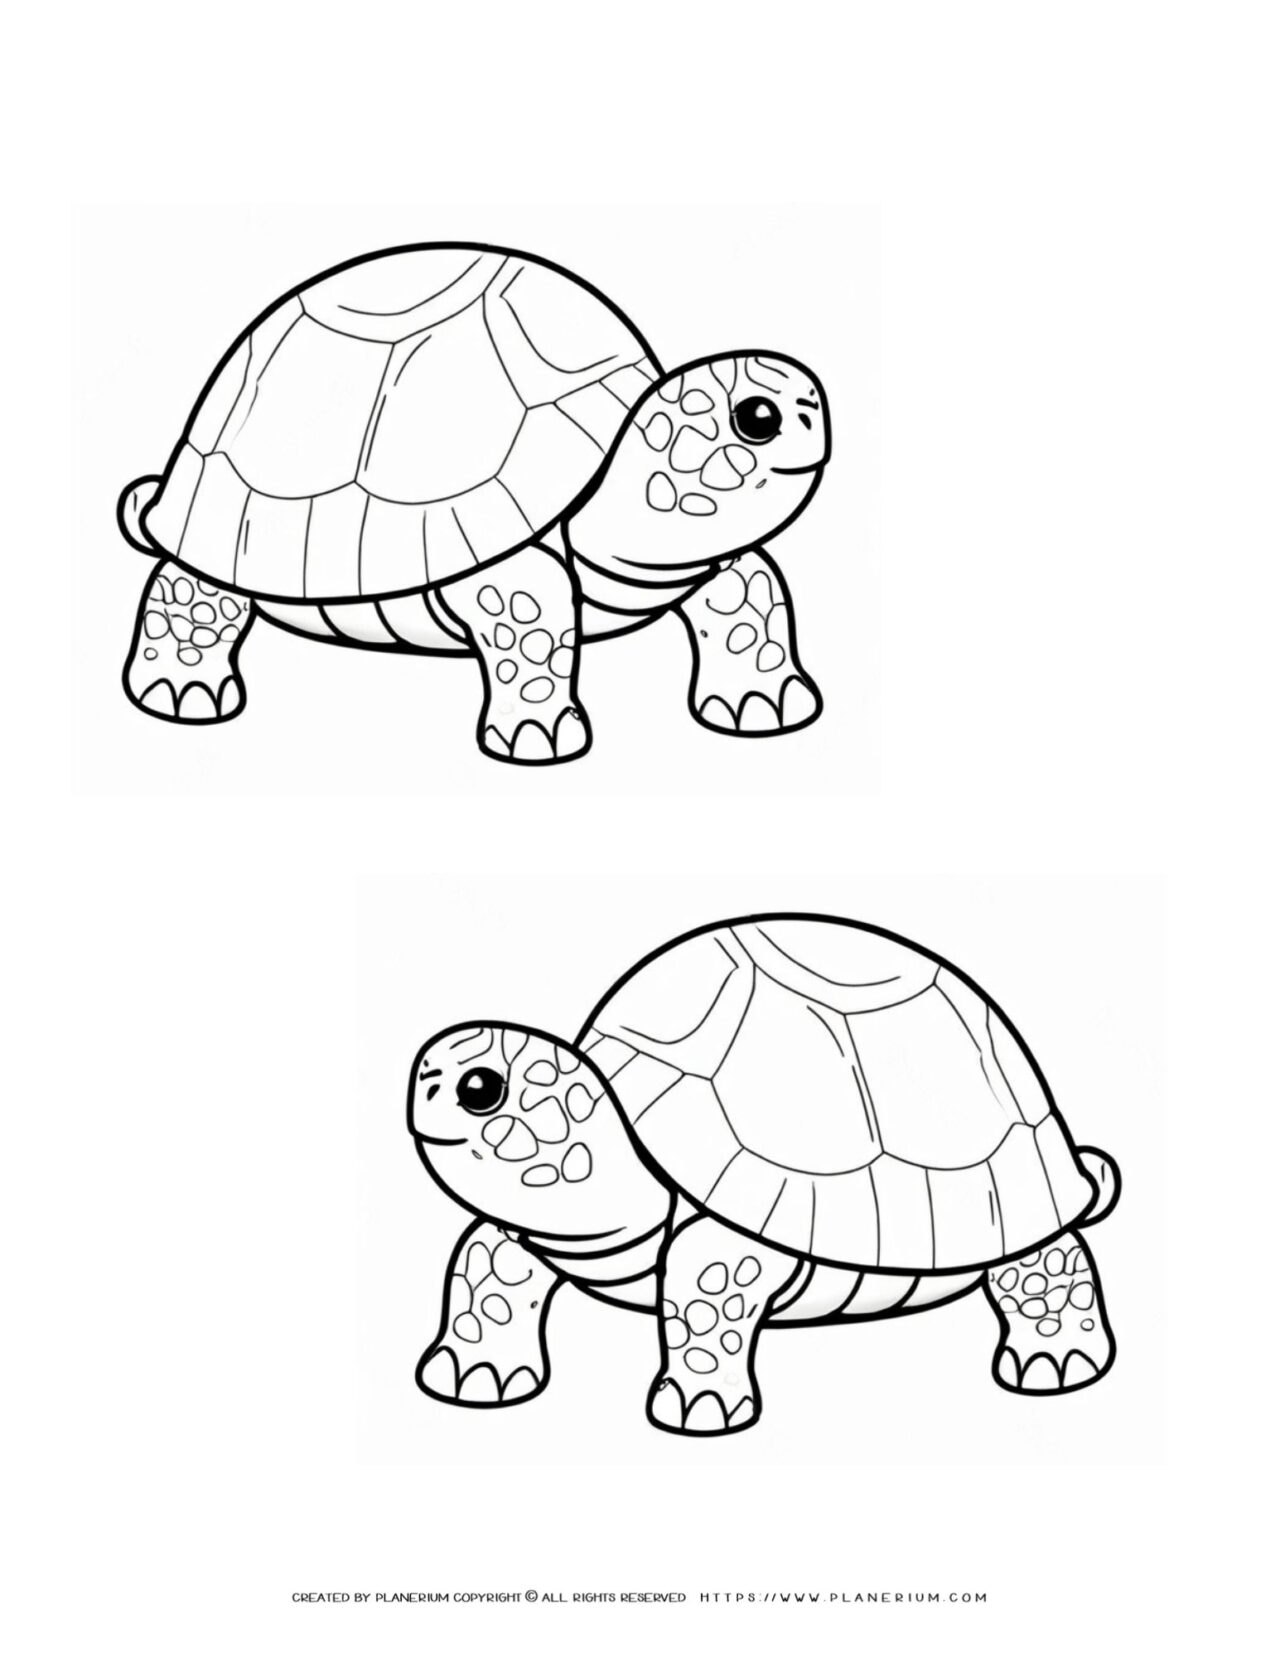 Two-Detailed-Turtles-Cartoon-Style-Coloring-Page-for-Kids